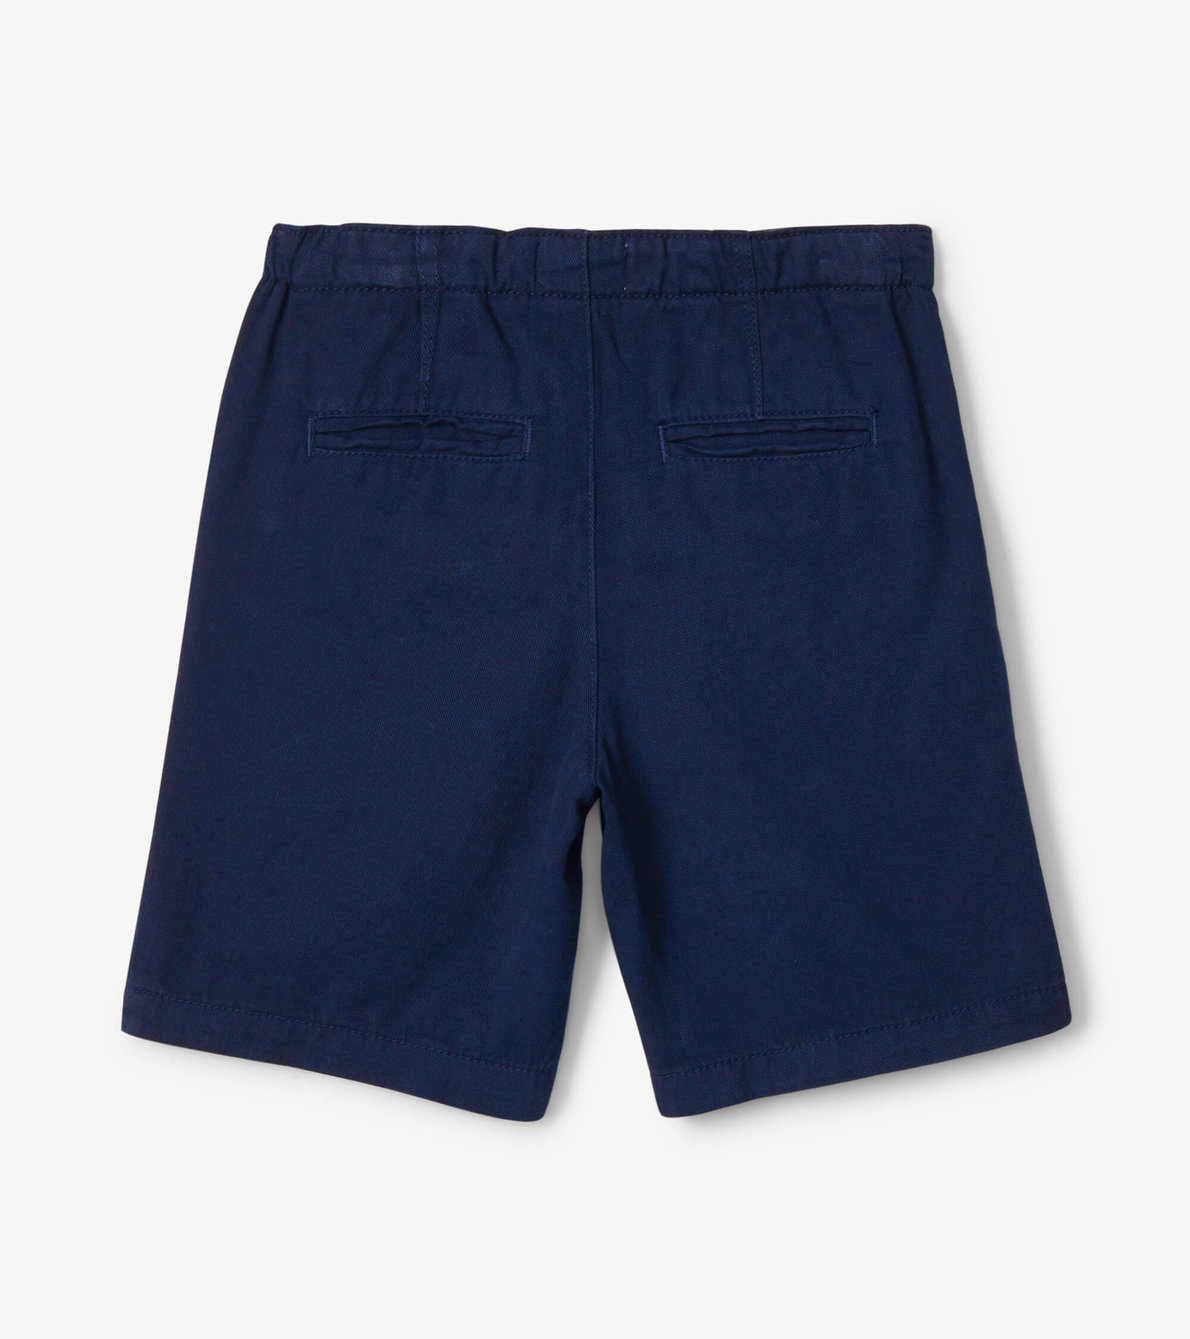 View larger image of Boys Navy Twill Twill Shorts